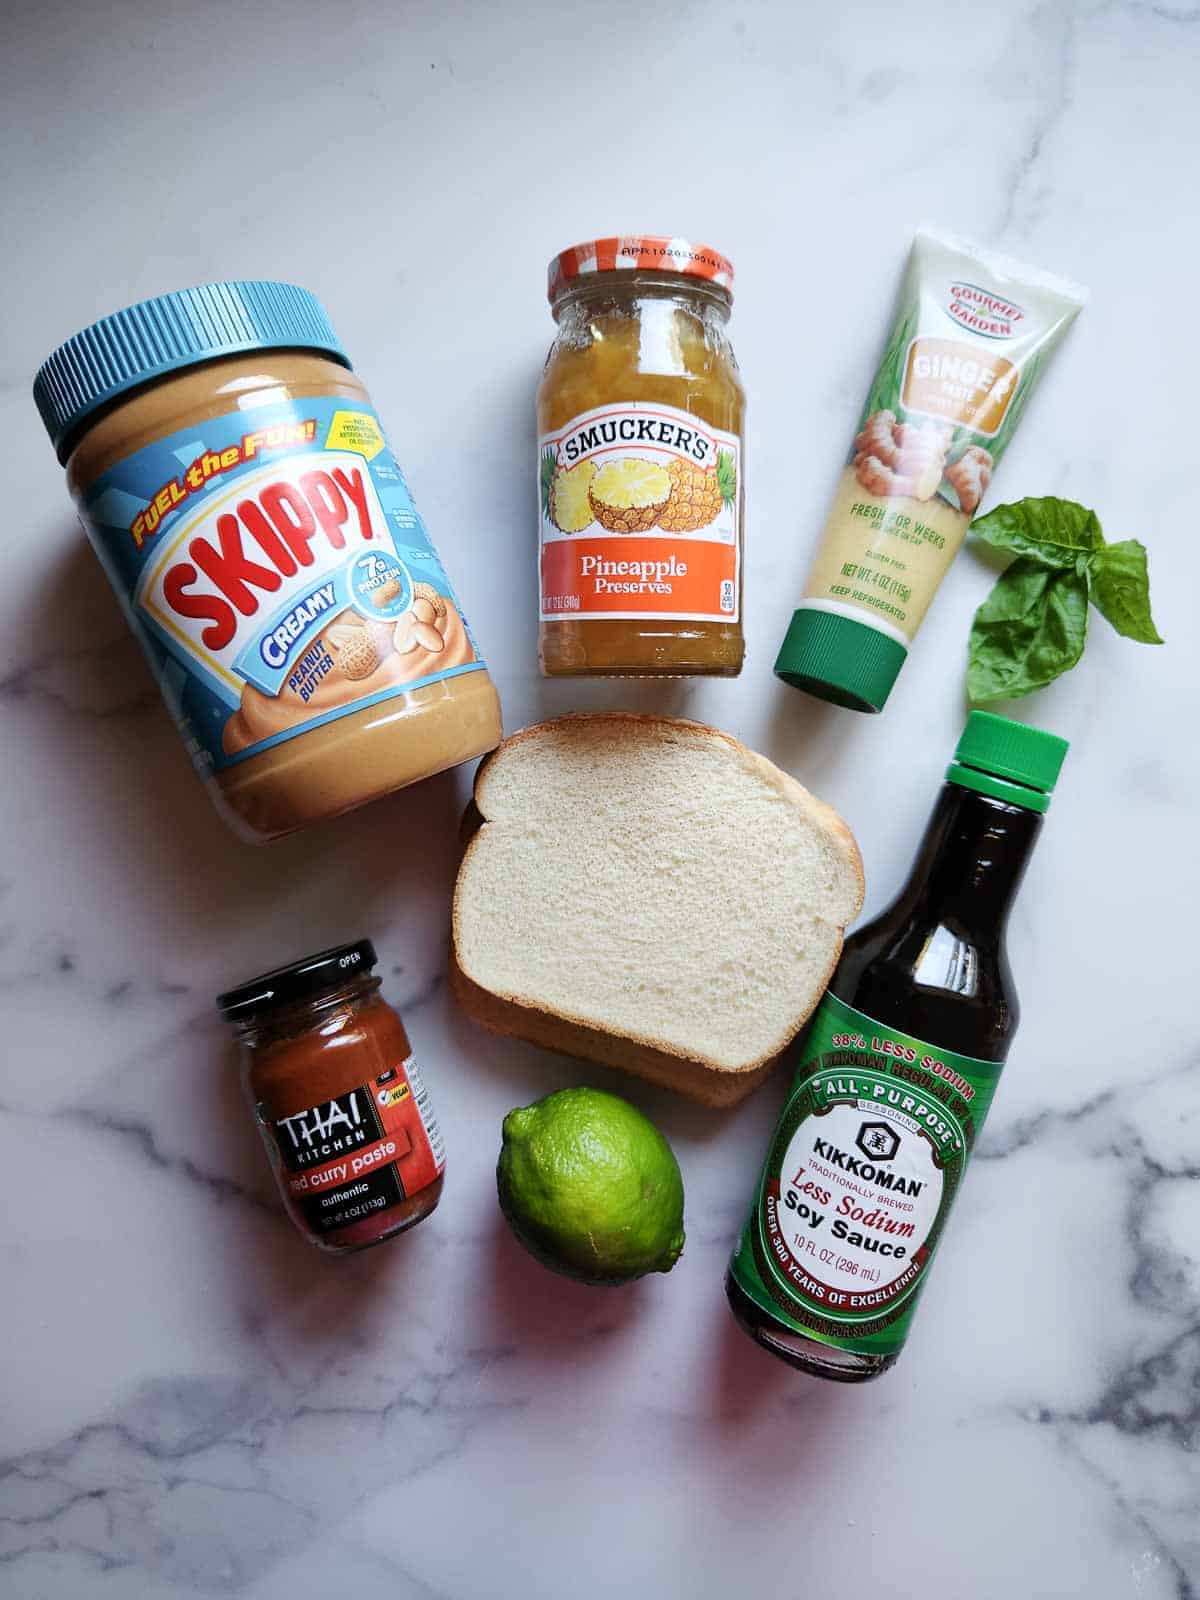 Ingredients for Thai peanut butter and jelly sandwich.